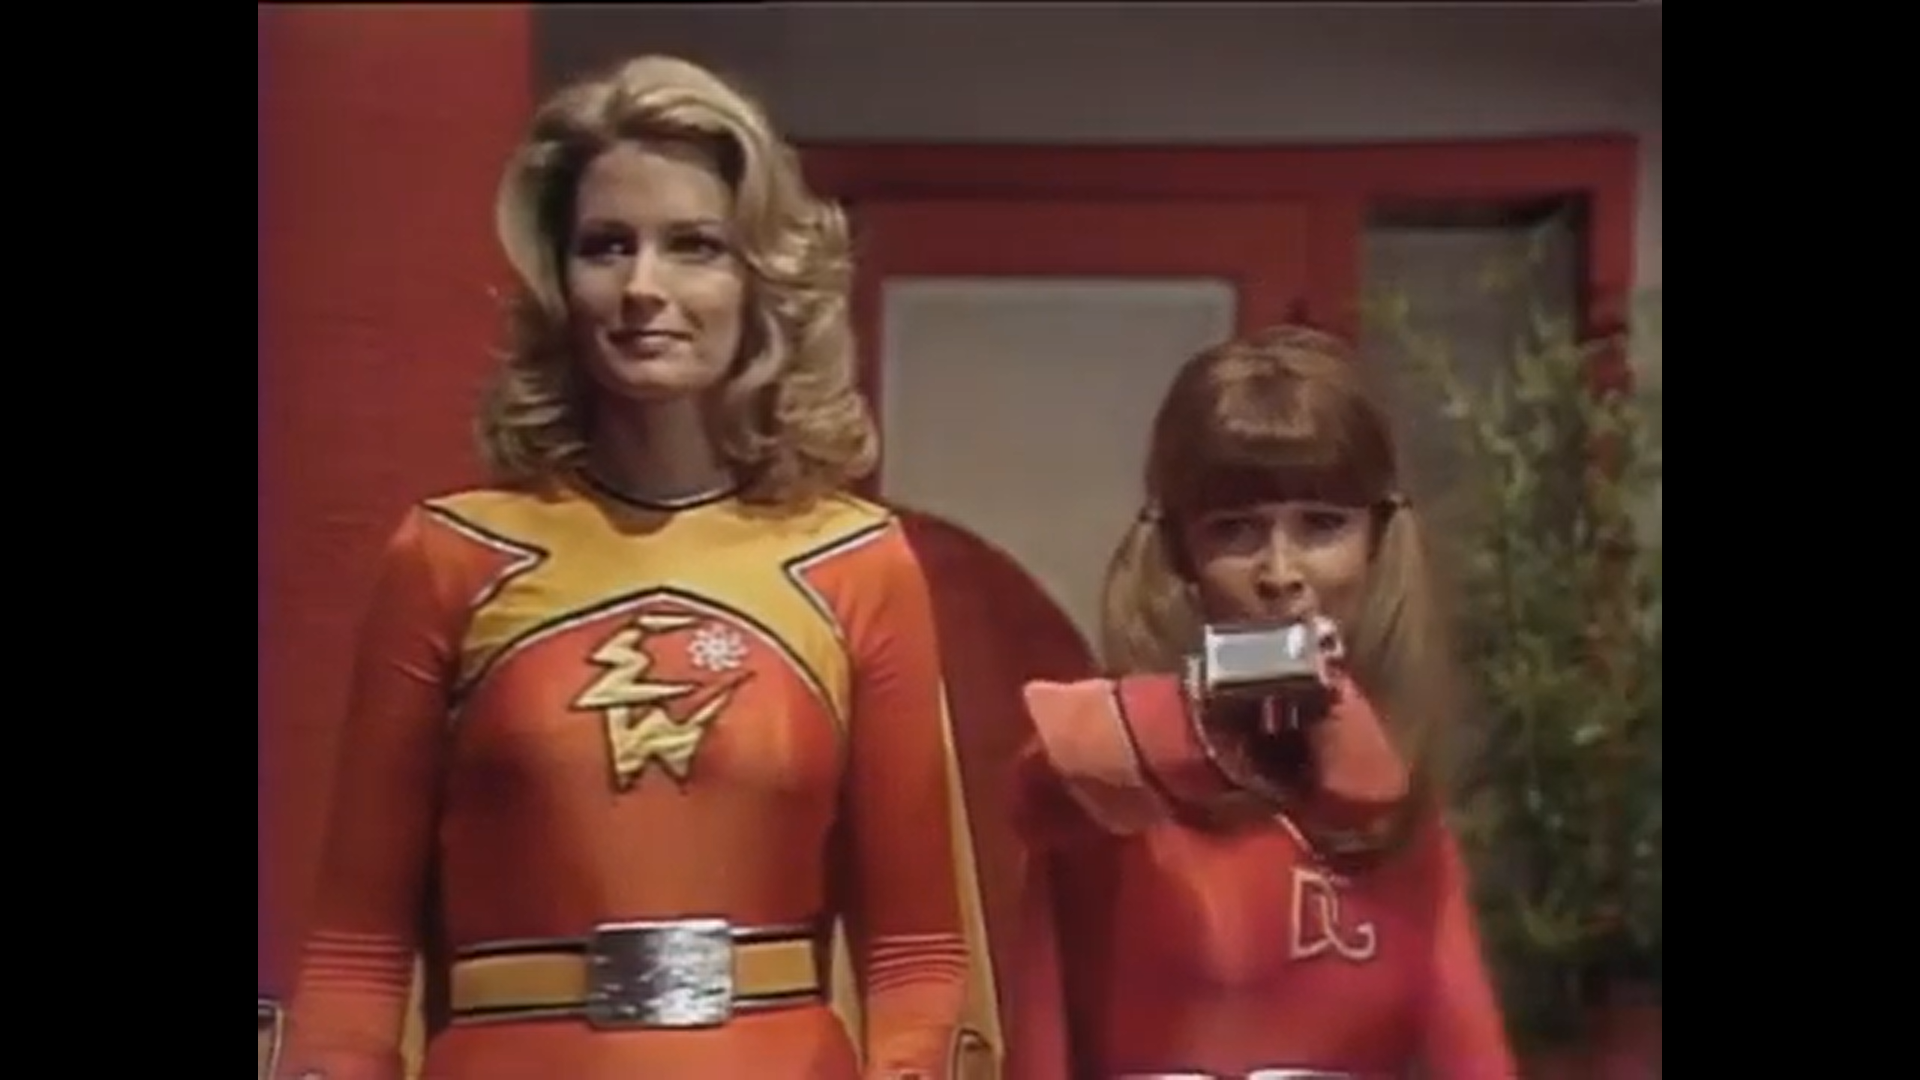 Dyna Girl jumps Into Action, Electra Woman Watches.png